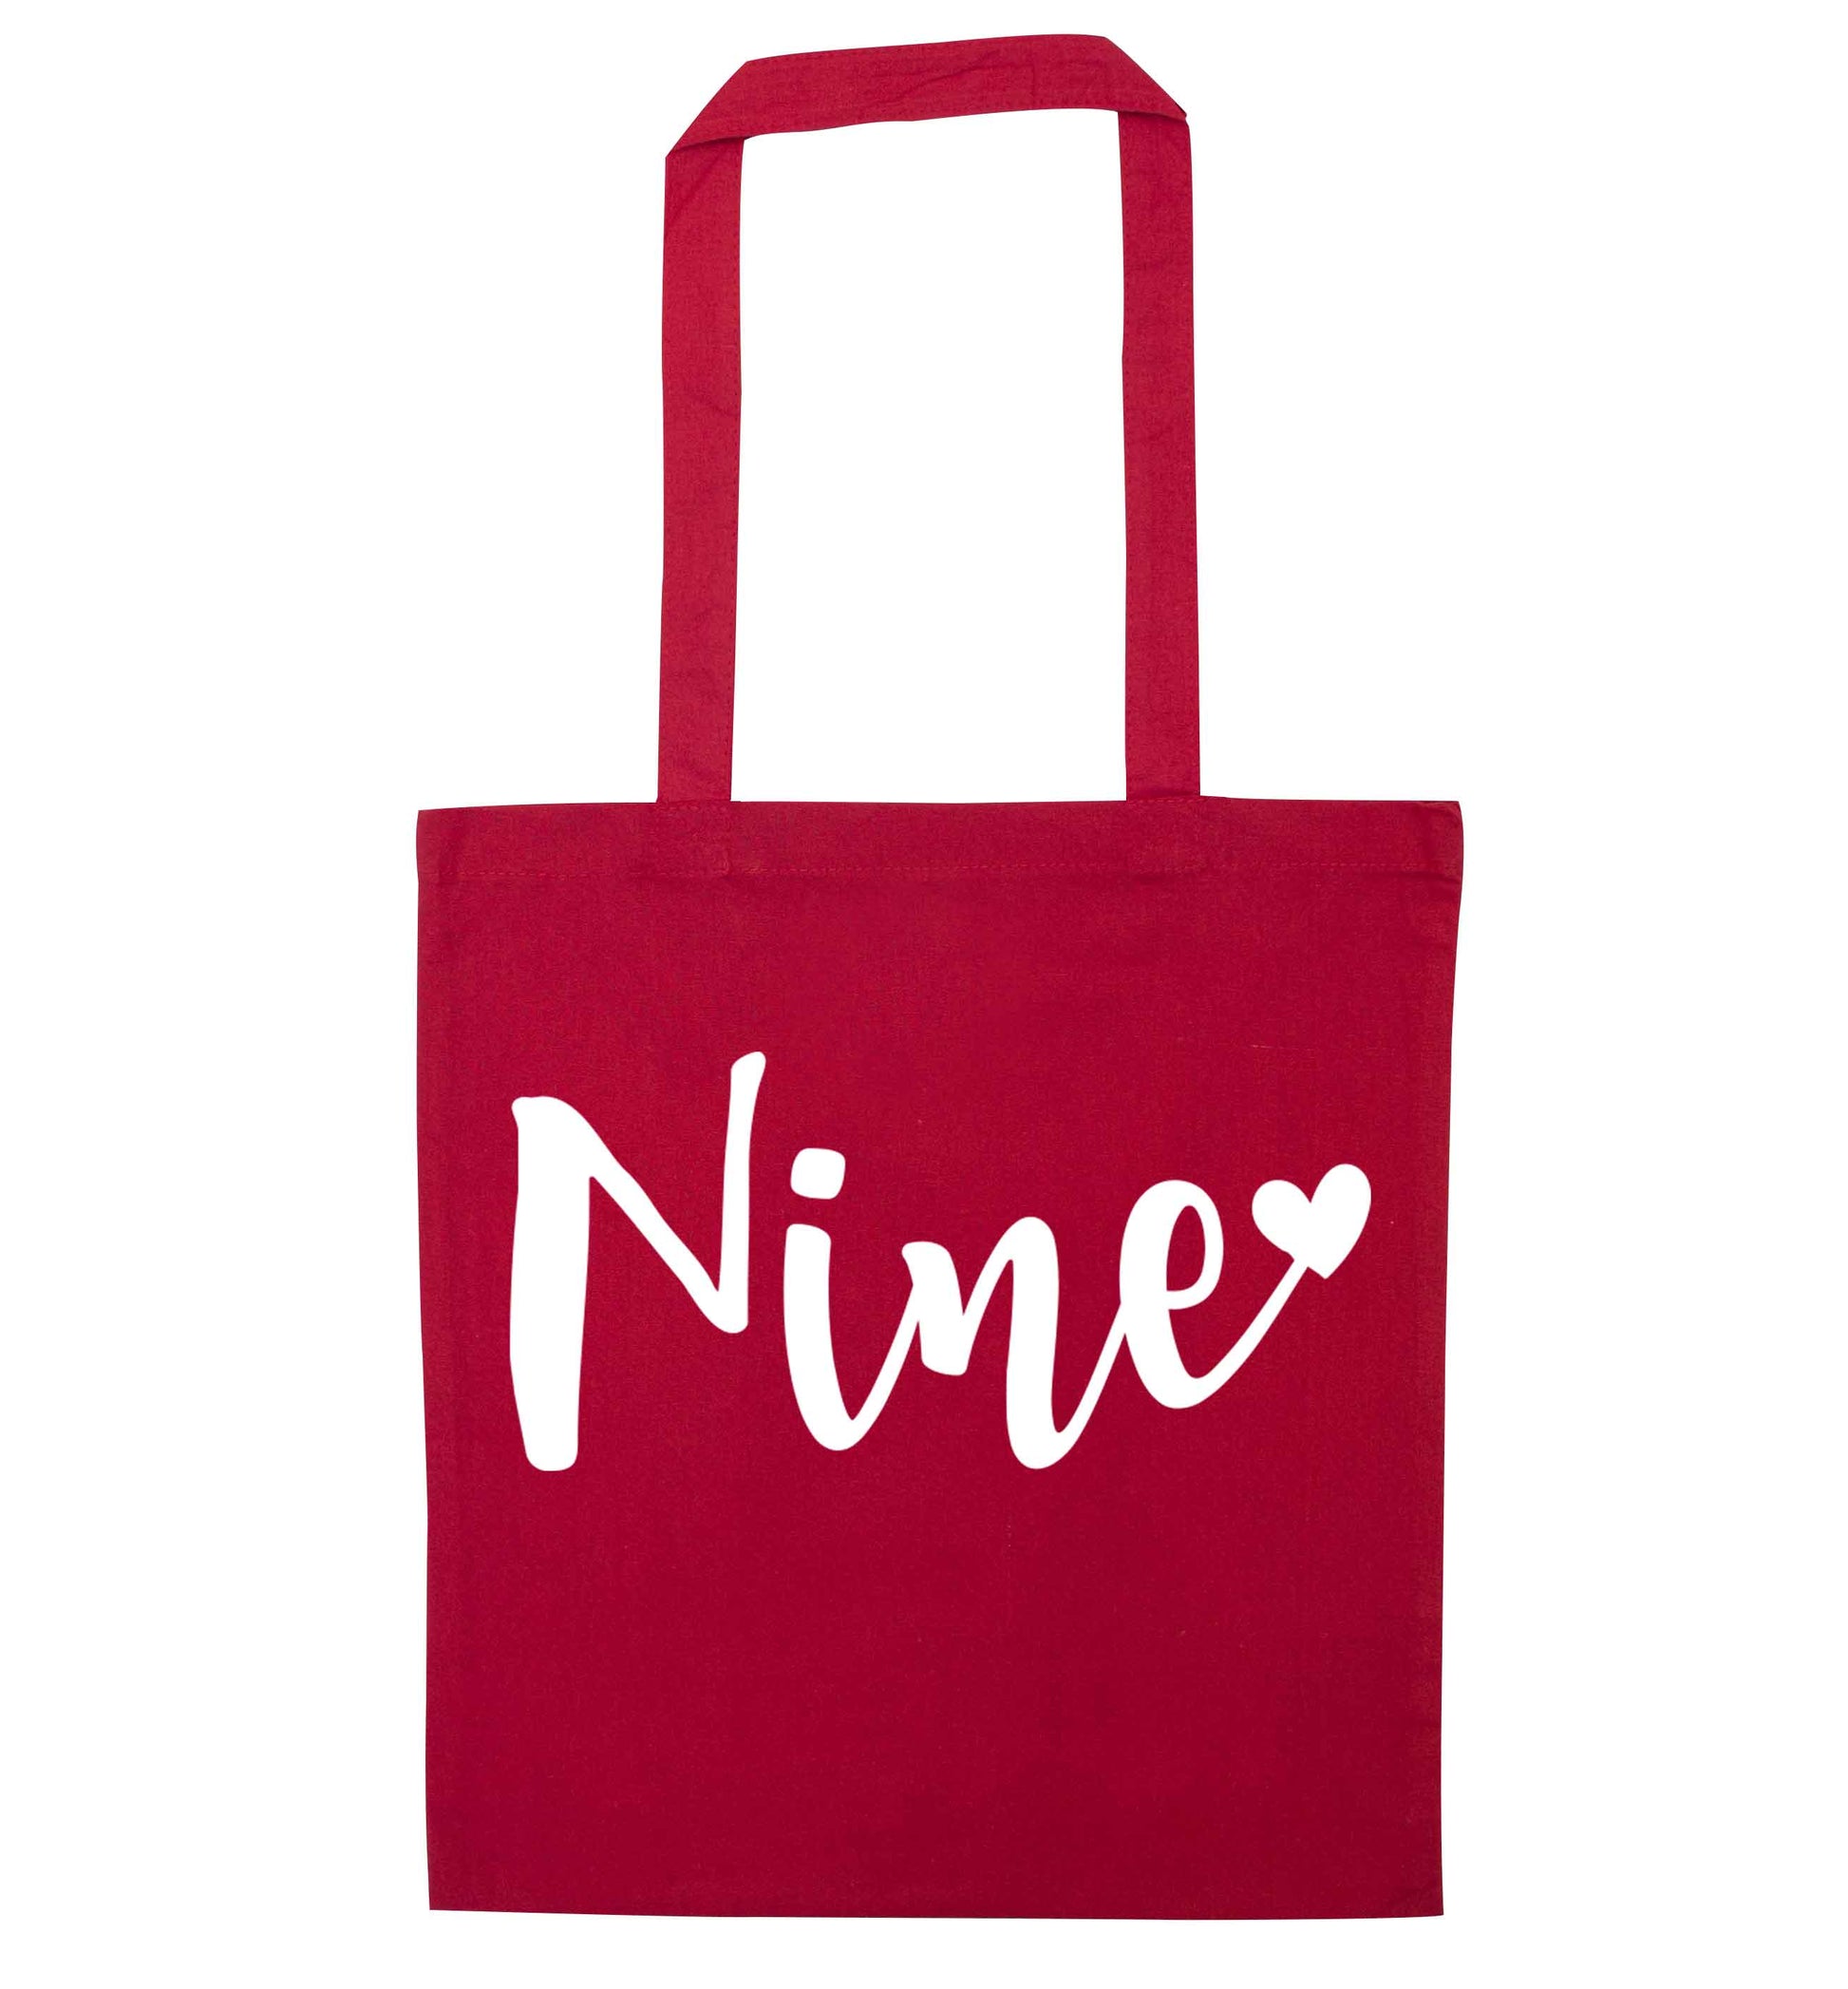 Nine and heart red tote bag